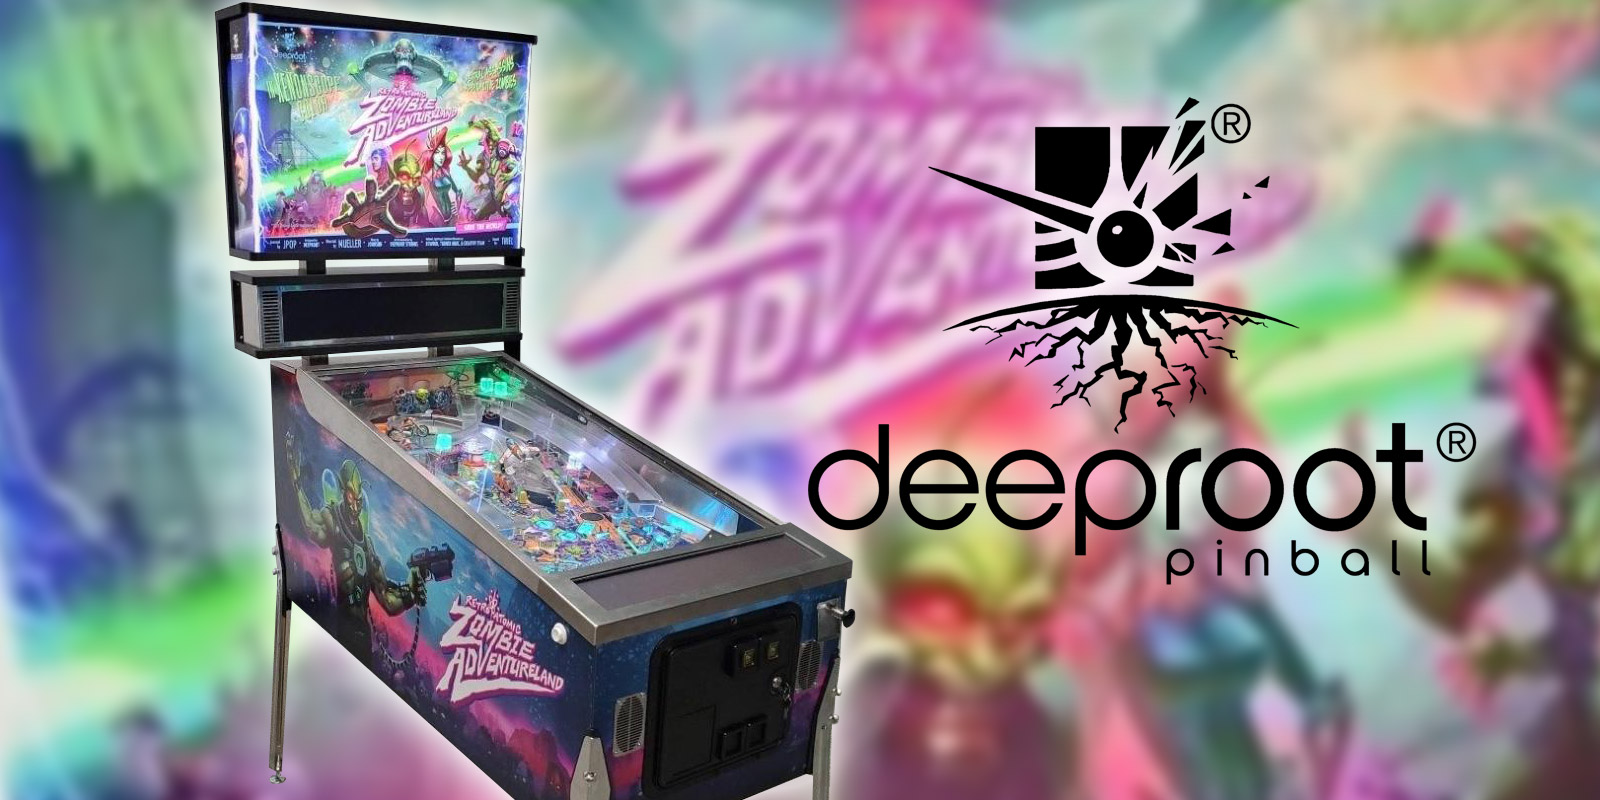 Deeproot Pinball delays its launch for a third time